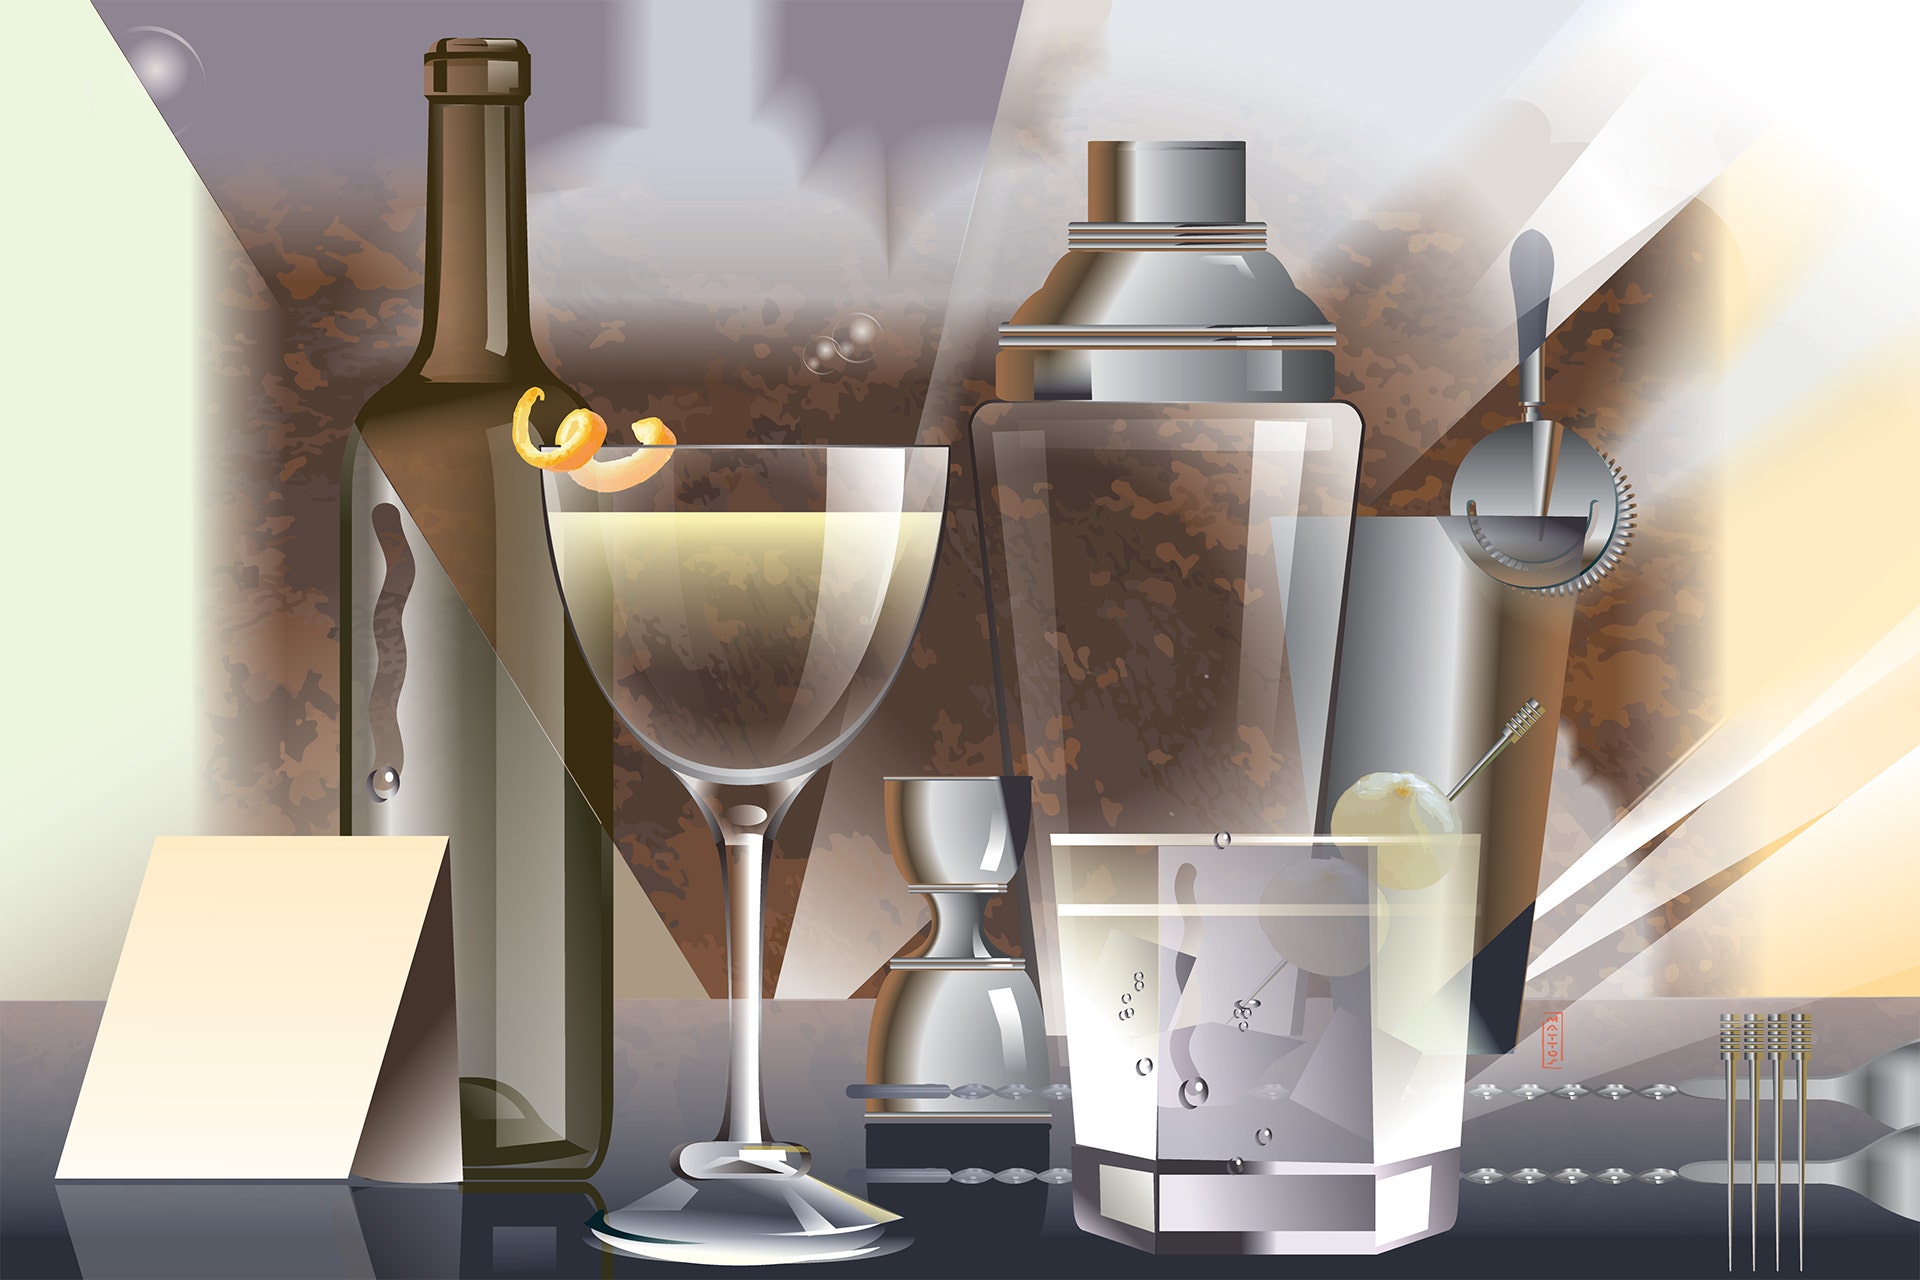 Art Deco-style illustration of martinis with Nick & Nora glass